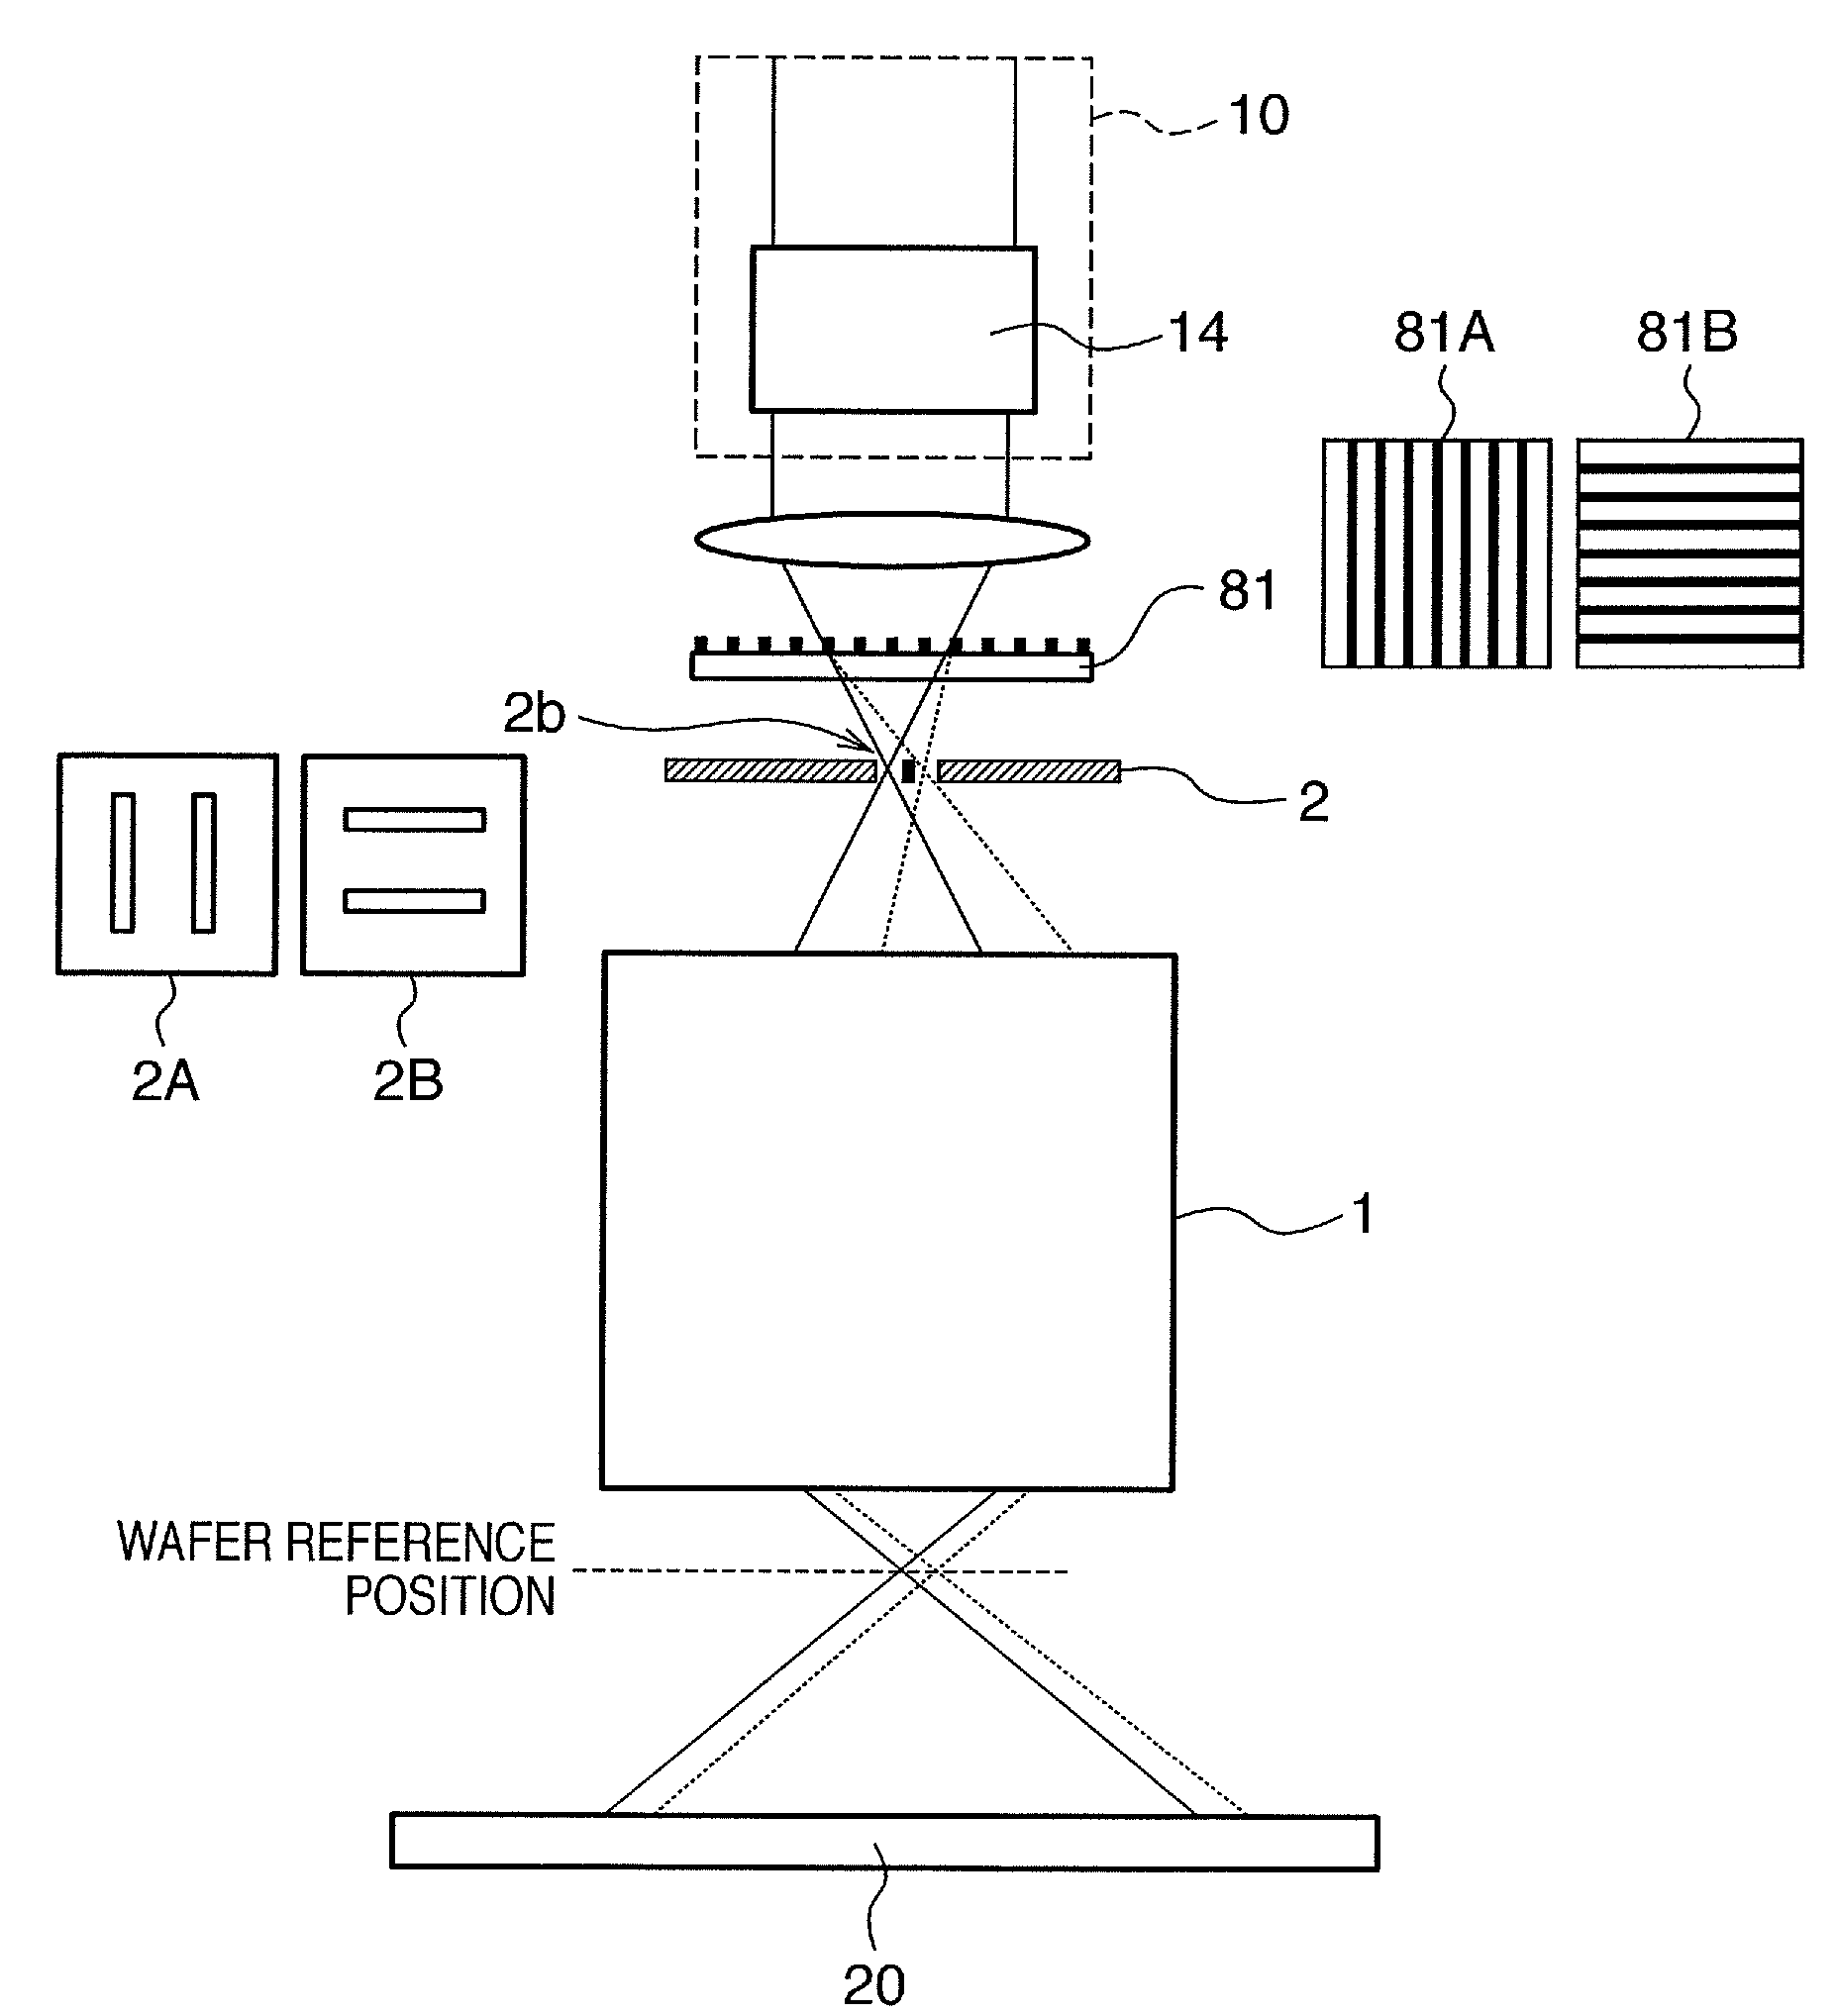 Exposure apparatus and device manufacturing method using a common path interferometer to form an interference pattern and a processor to calculate optical characteristics of projection optics using the interference pattern